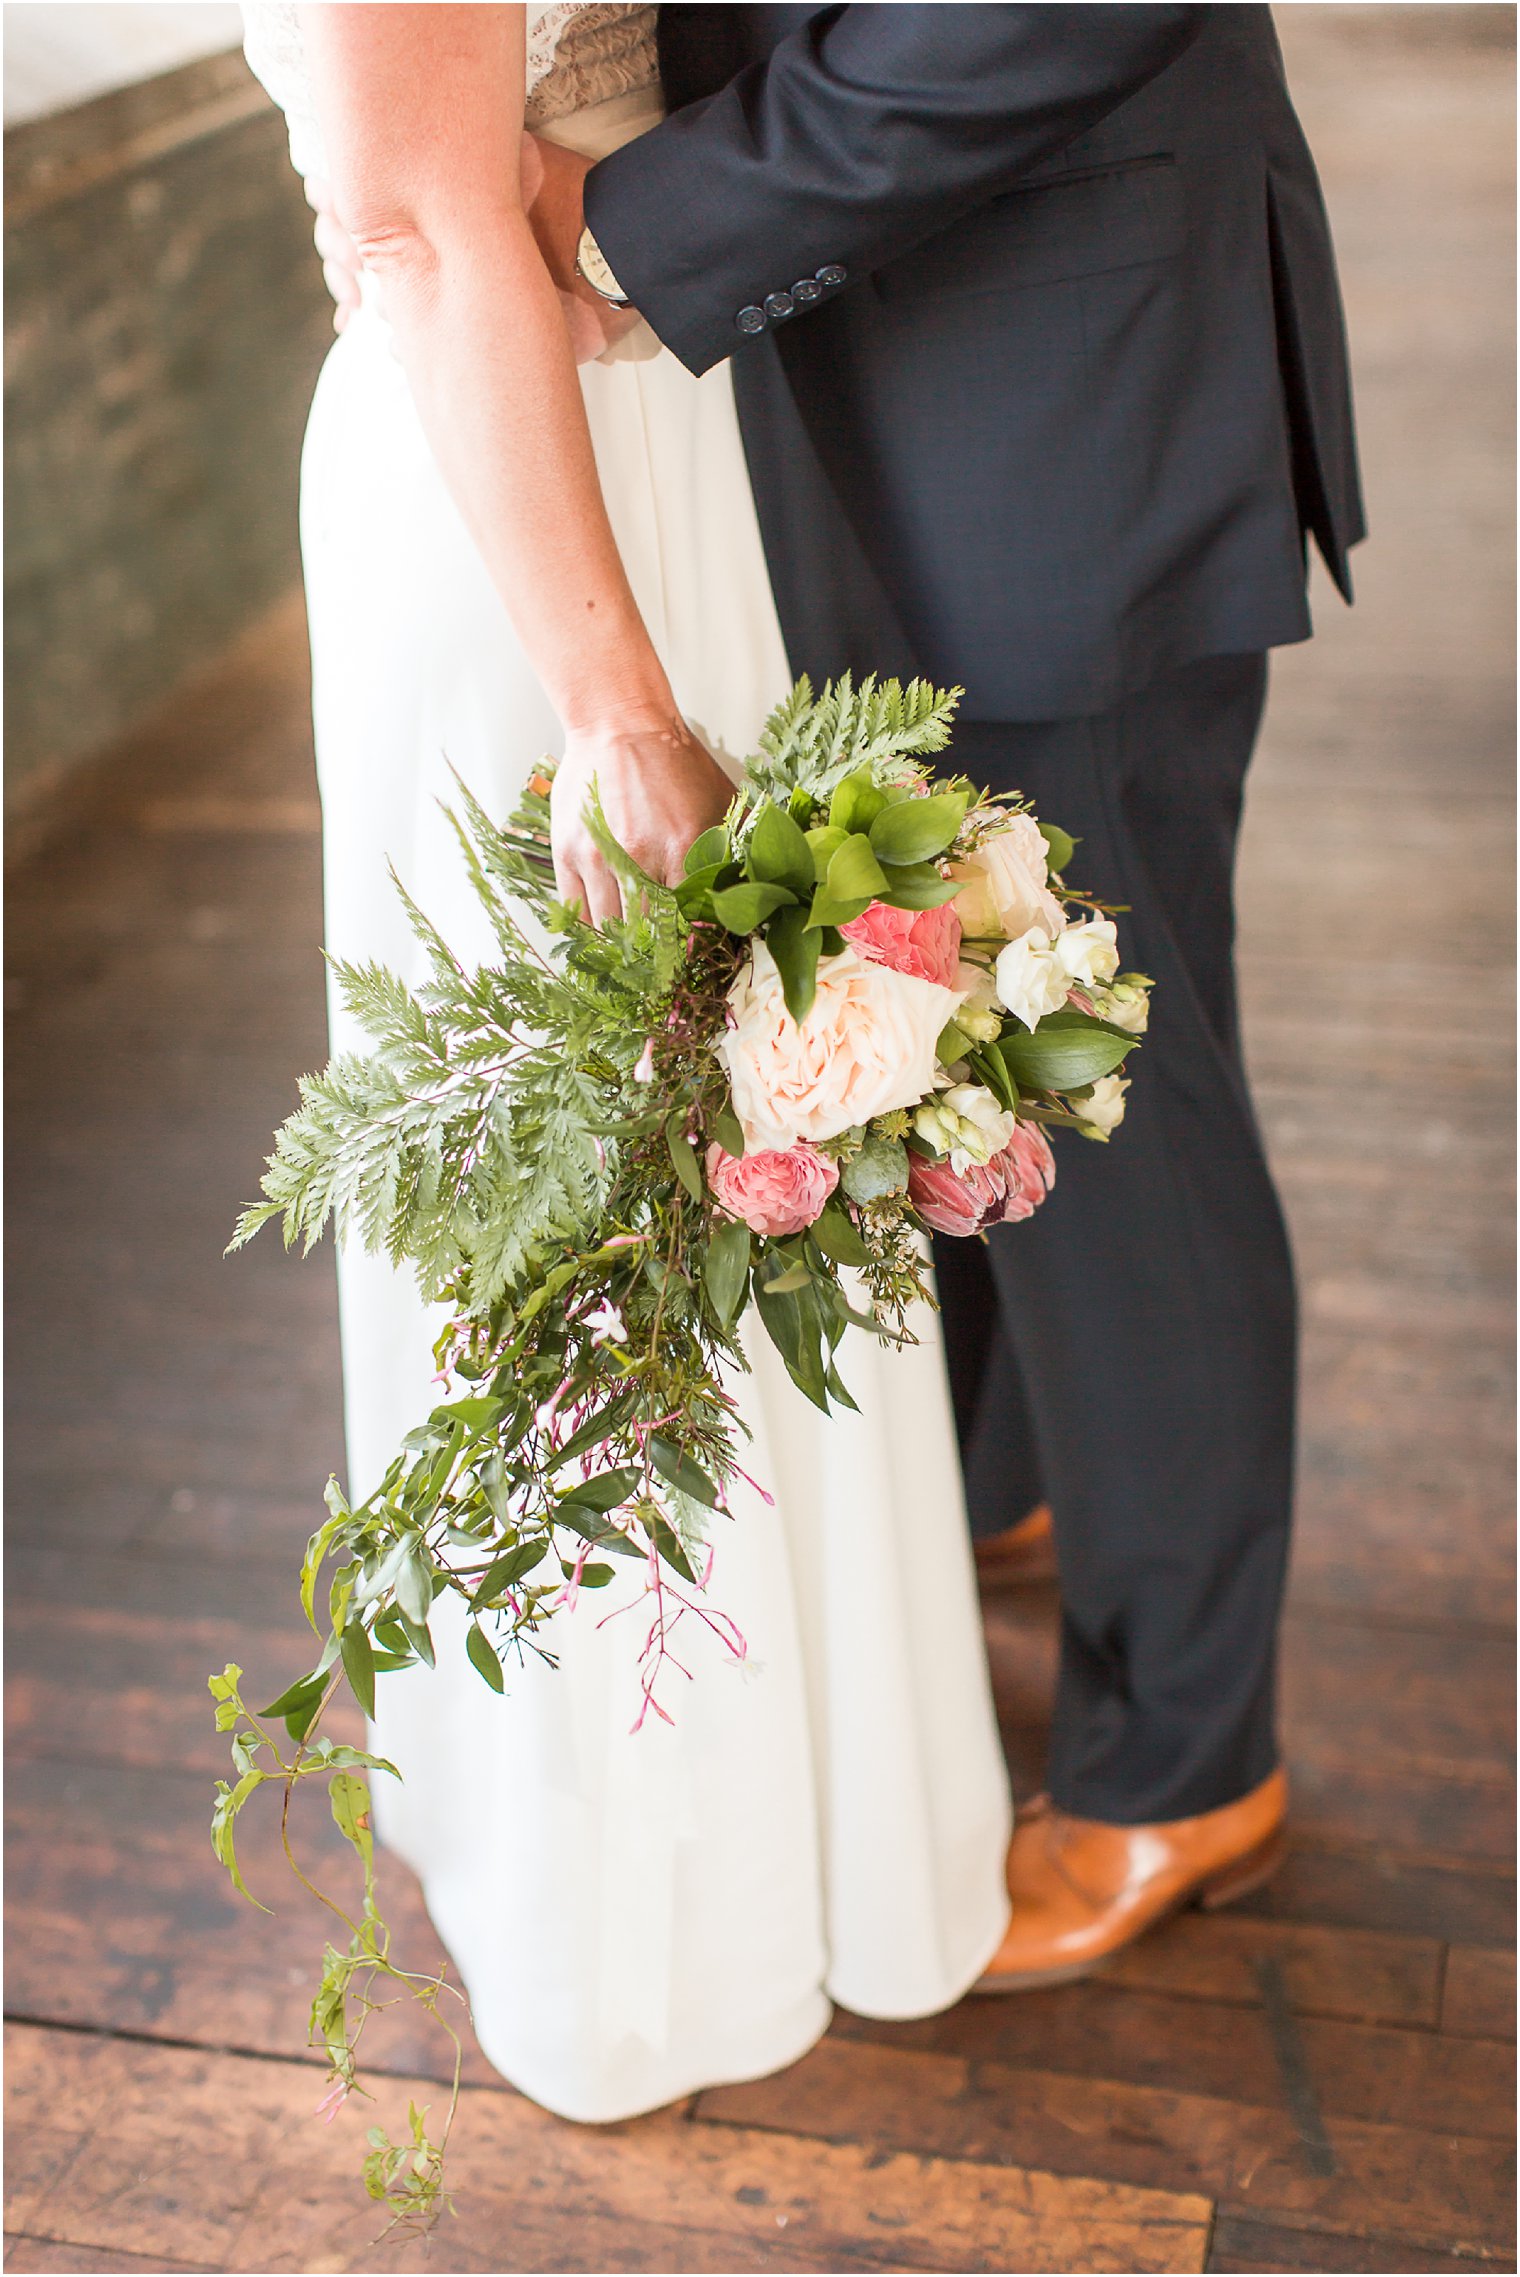 Wedding bouquet with pink protea